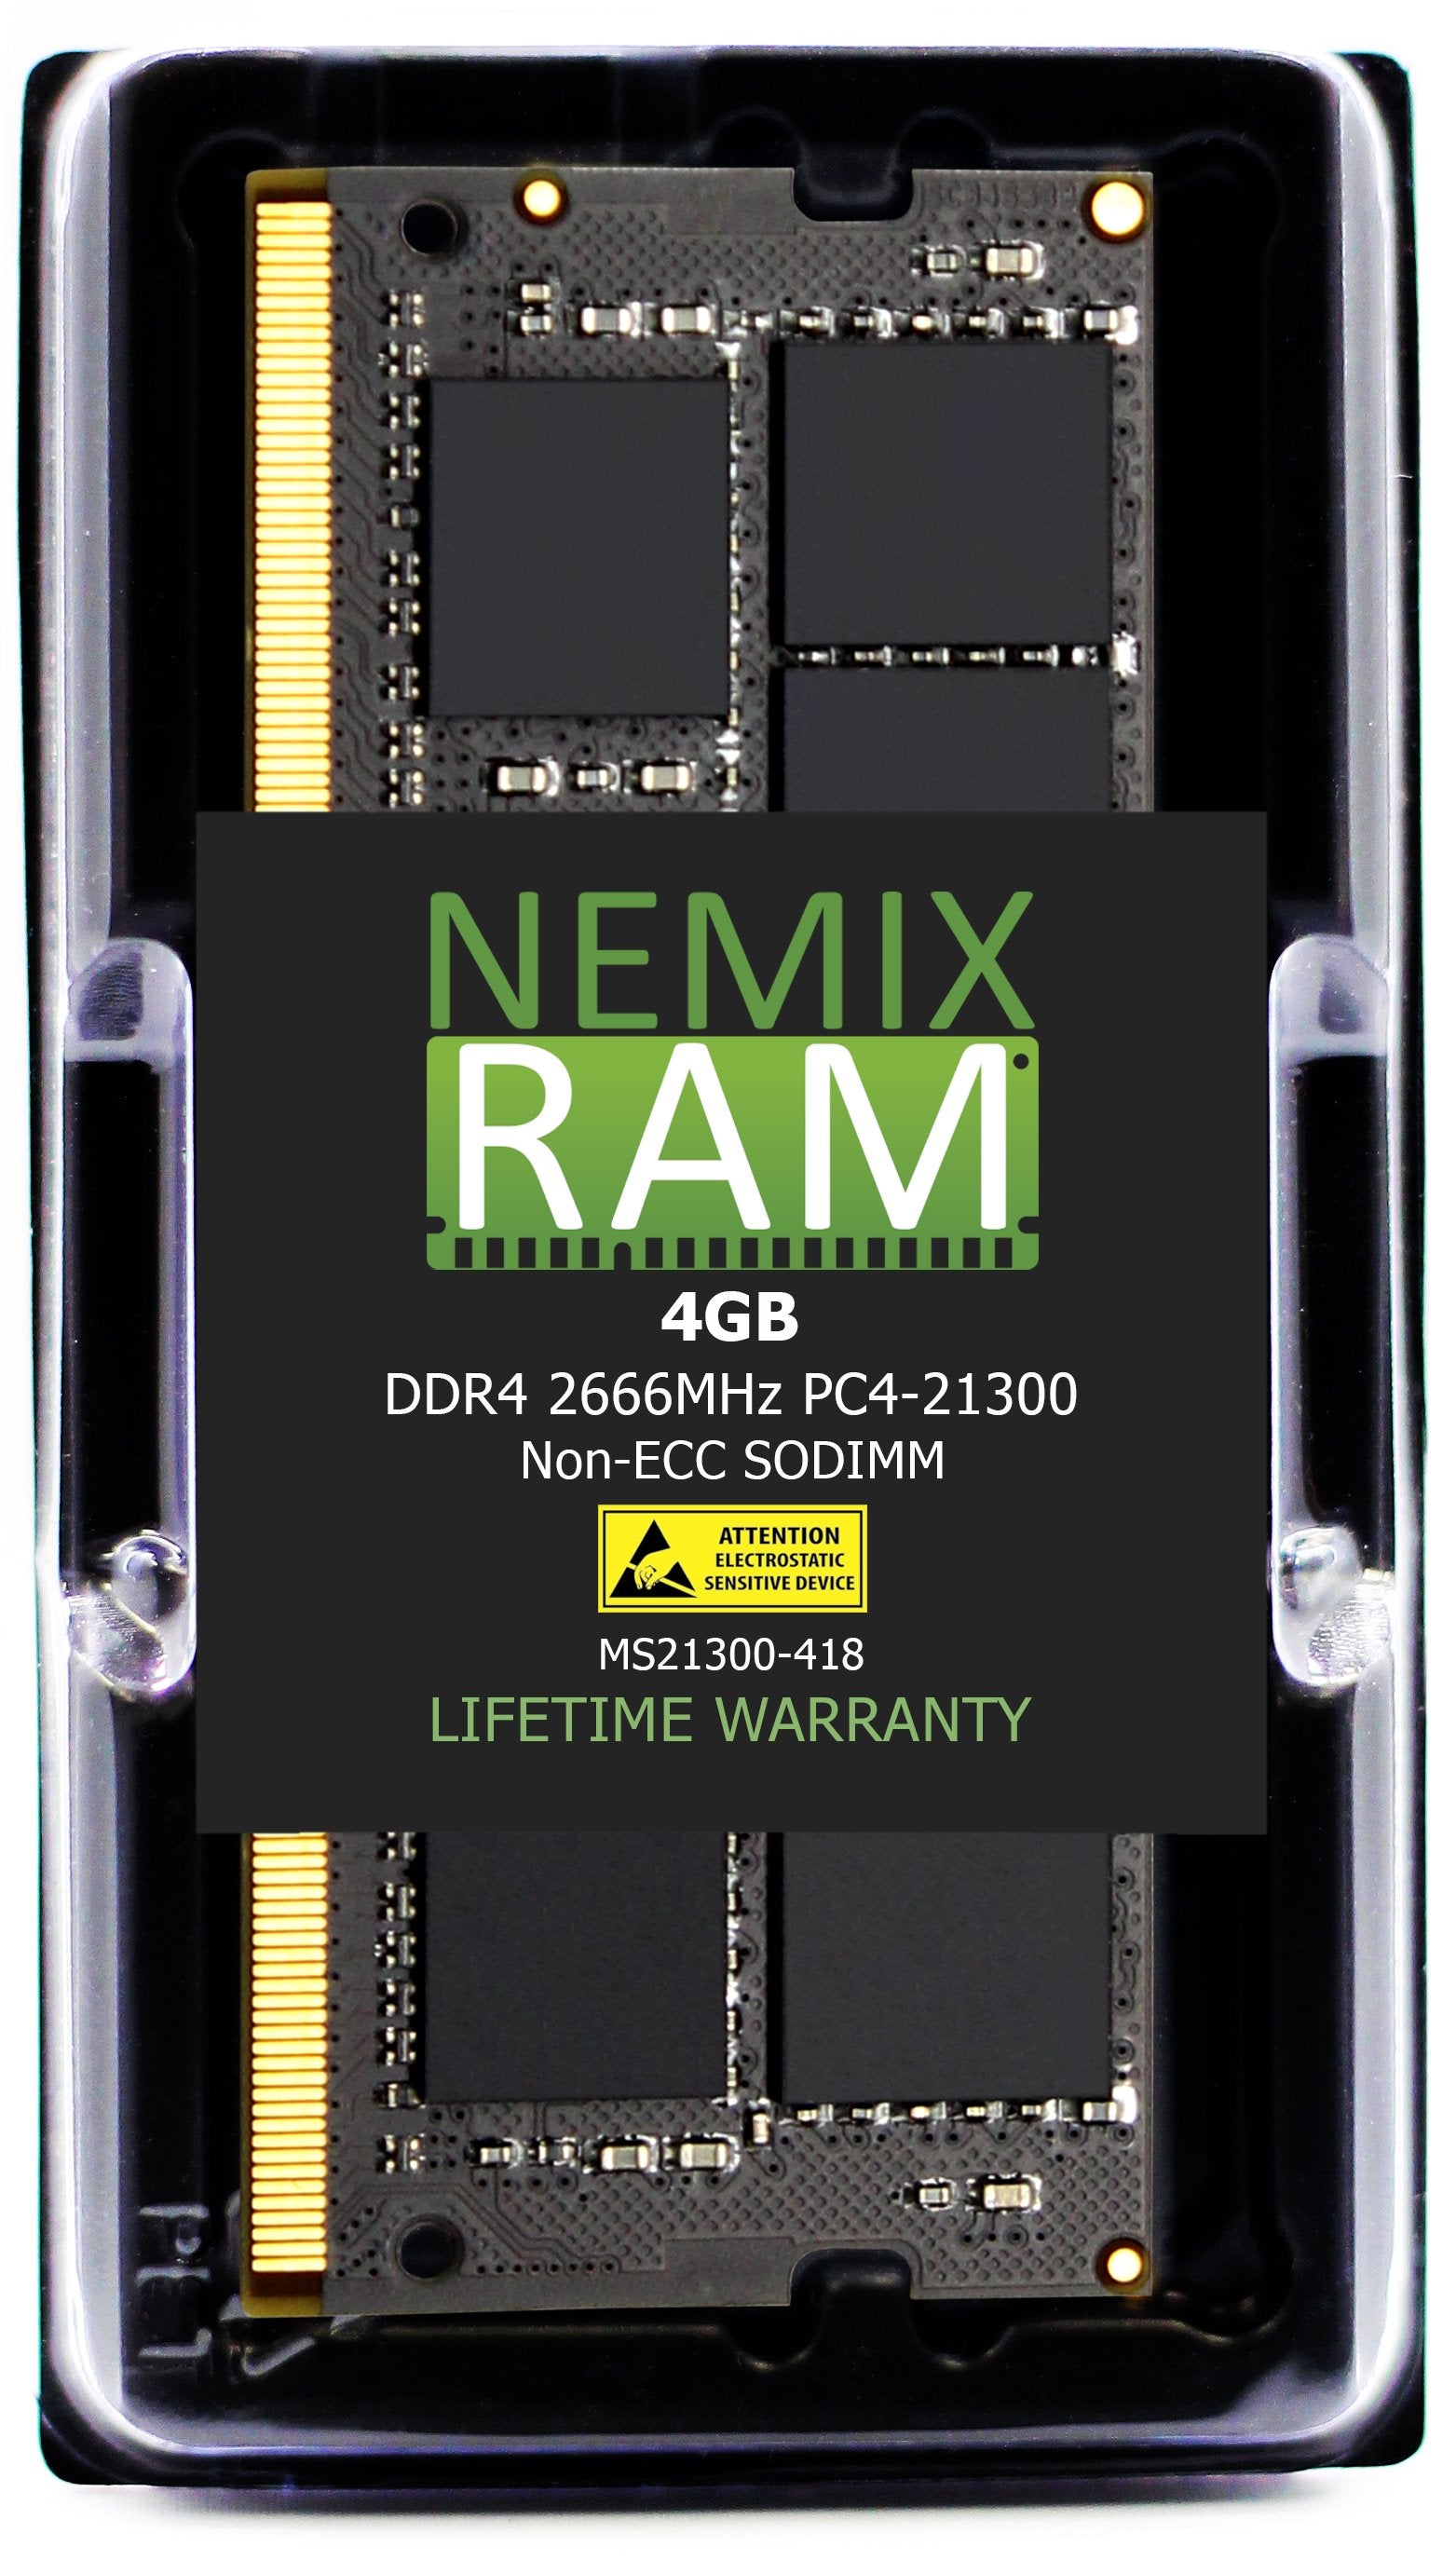 4GB DDR4-2666 PC4-21300 SODIMM Compatible with Synology D4NESO-2666-4G